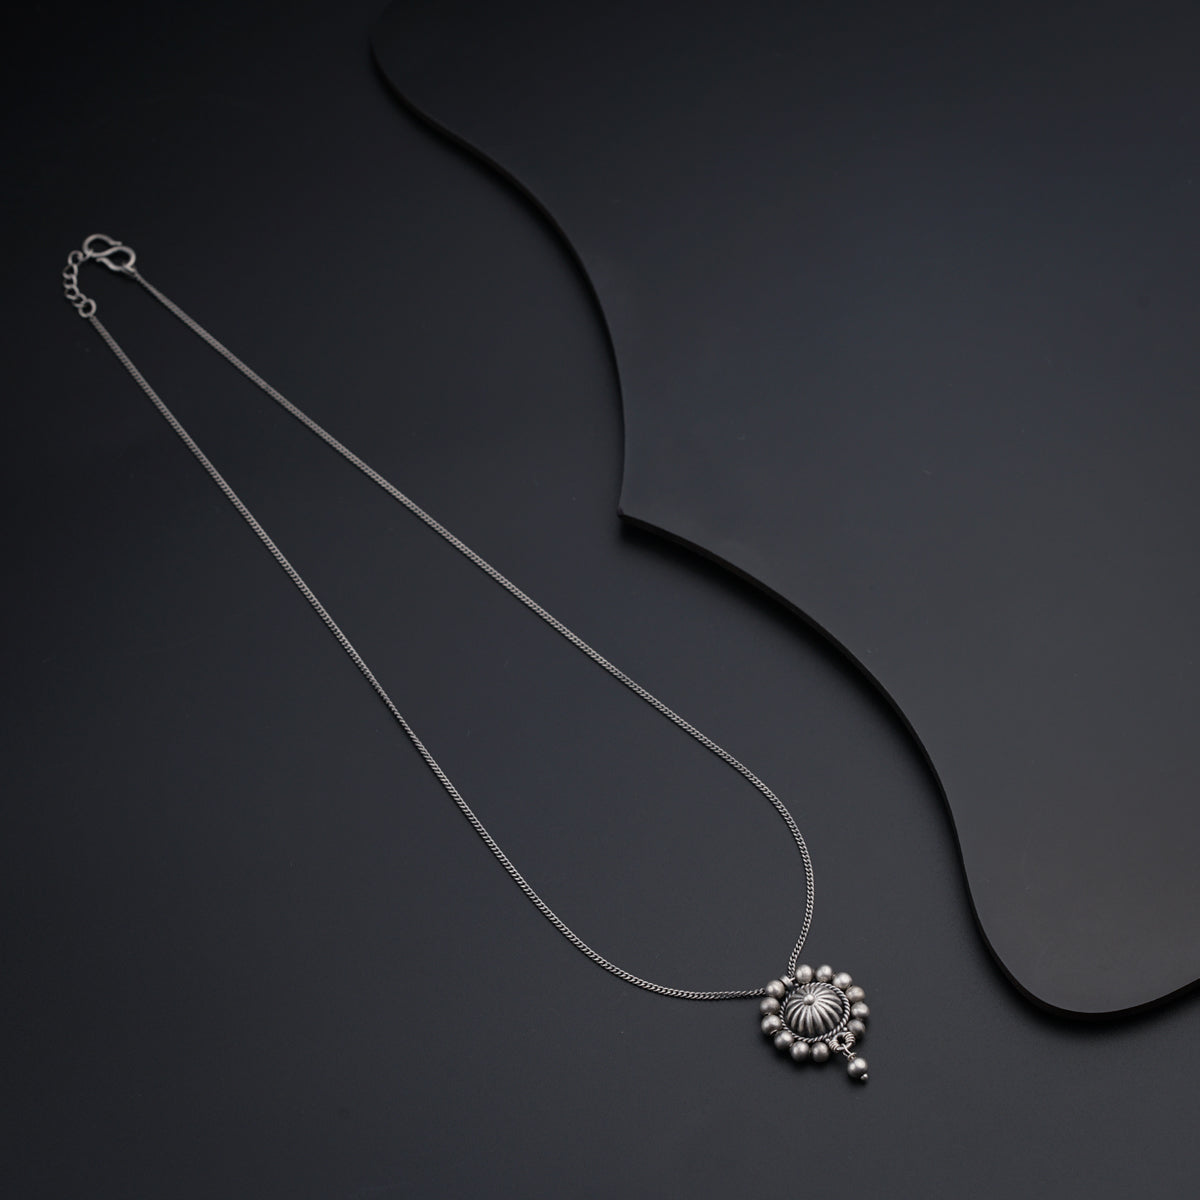 Handmade Sterling Silver Necklaces for Sale | Hyo Silver